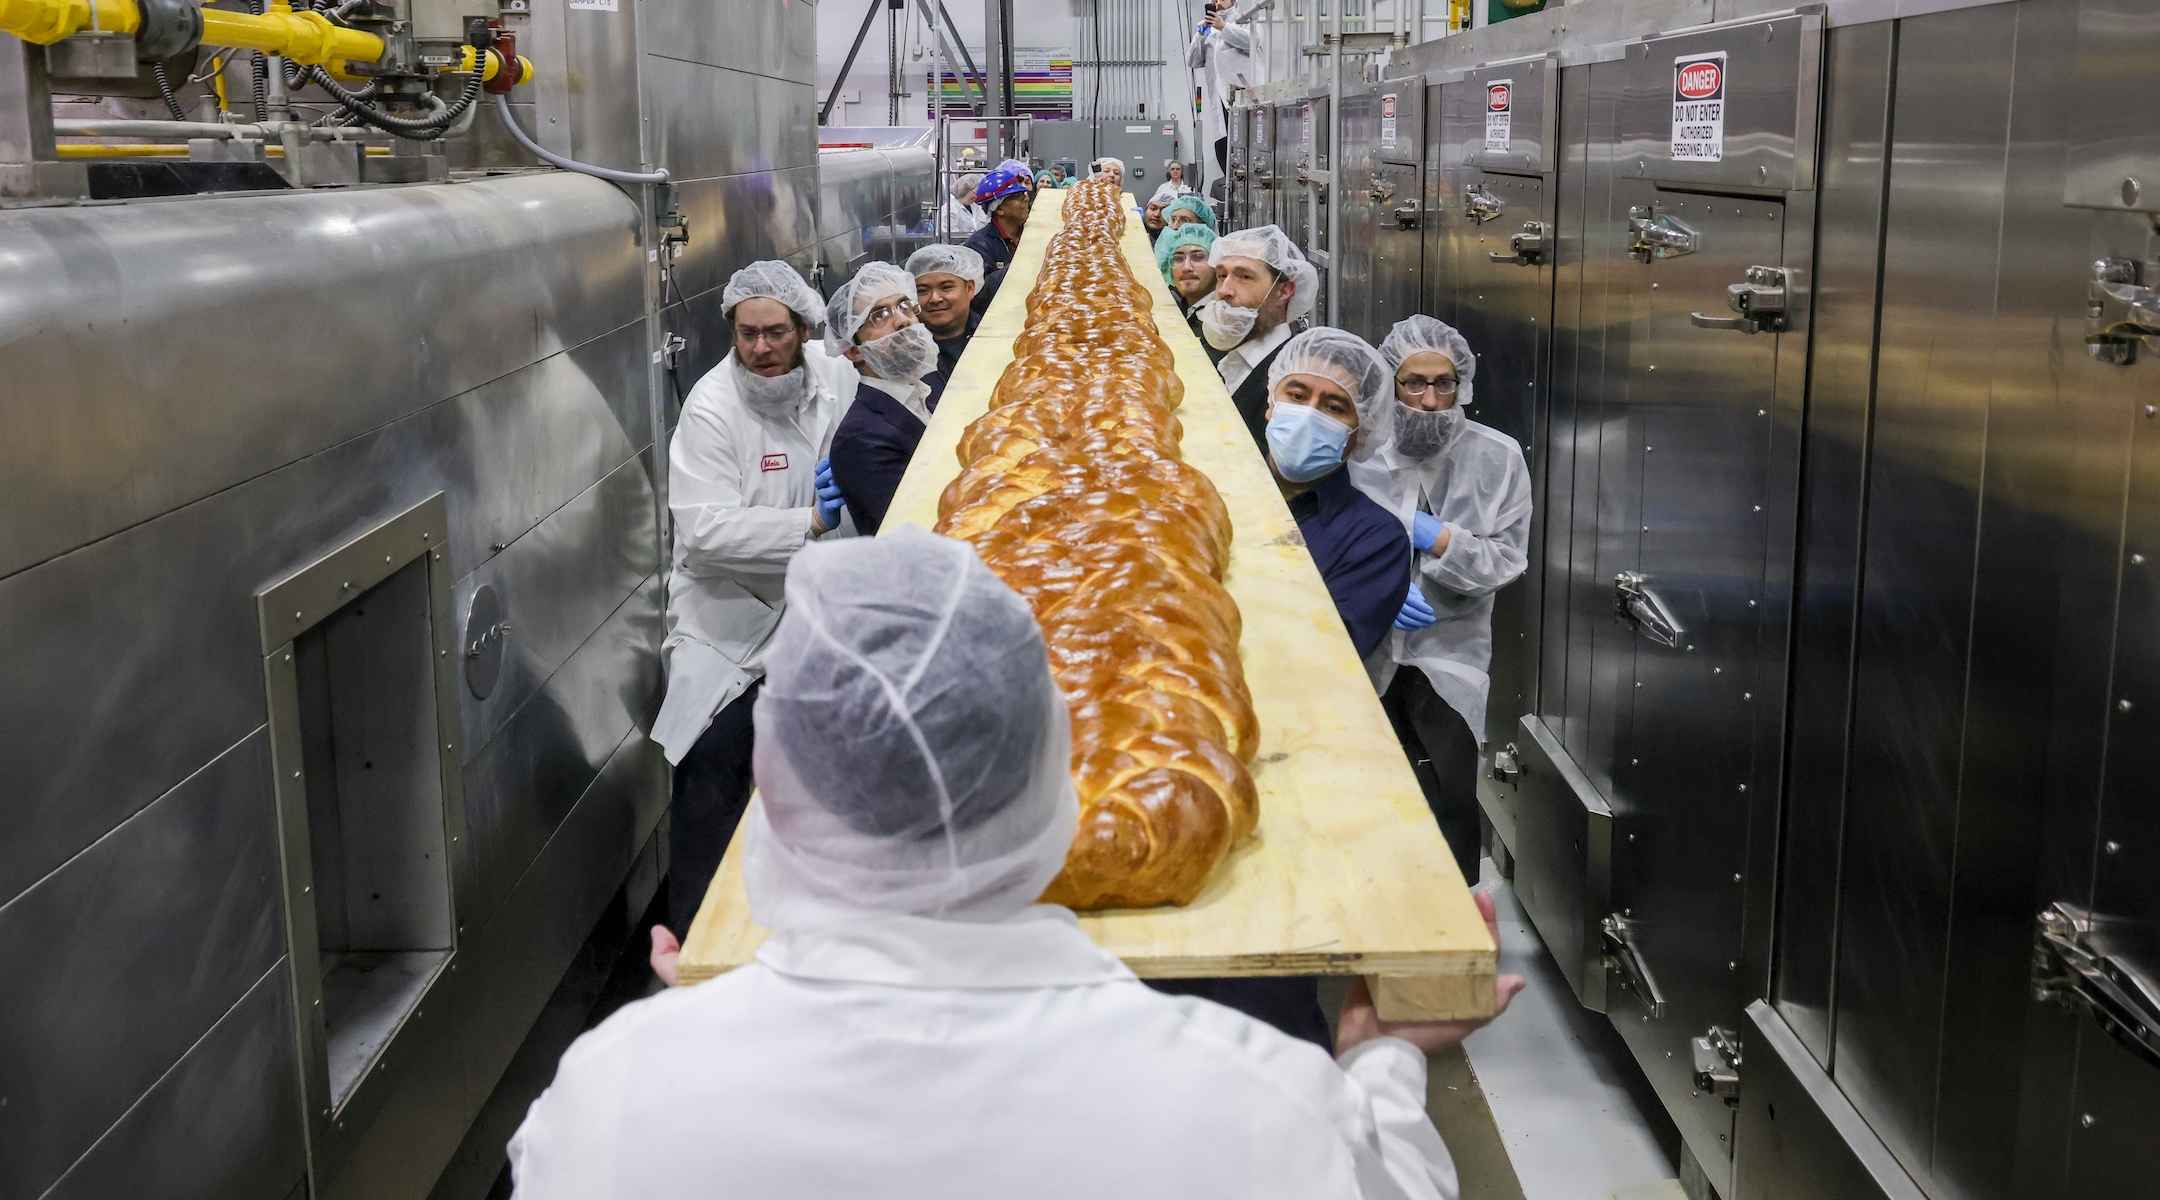 The 35 foot long challah was baked in a tunnel oven at David’s Cookies in New Jersey. It was then loaded onto a wooden plank and transported to the Upper West Side where it was unveiled at a day school’s Shabbat assembly. (JFNA/Vladimir Kolesnikov)